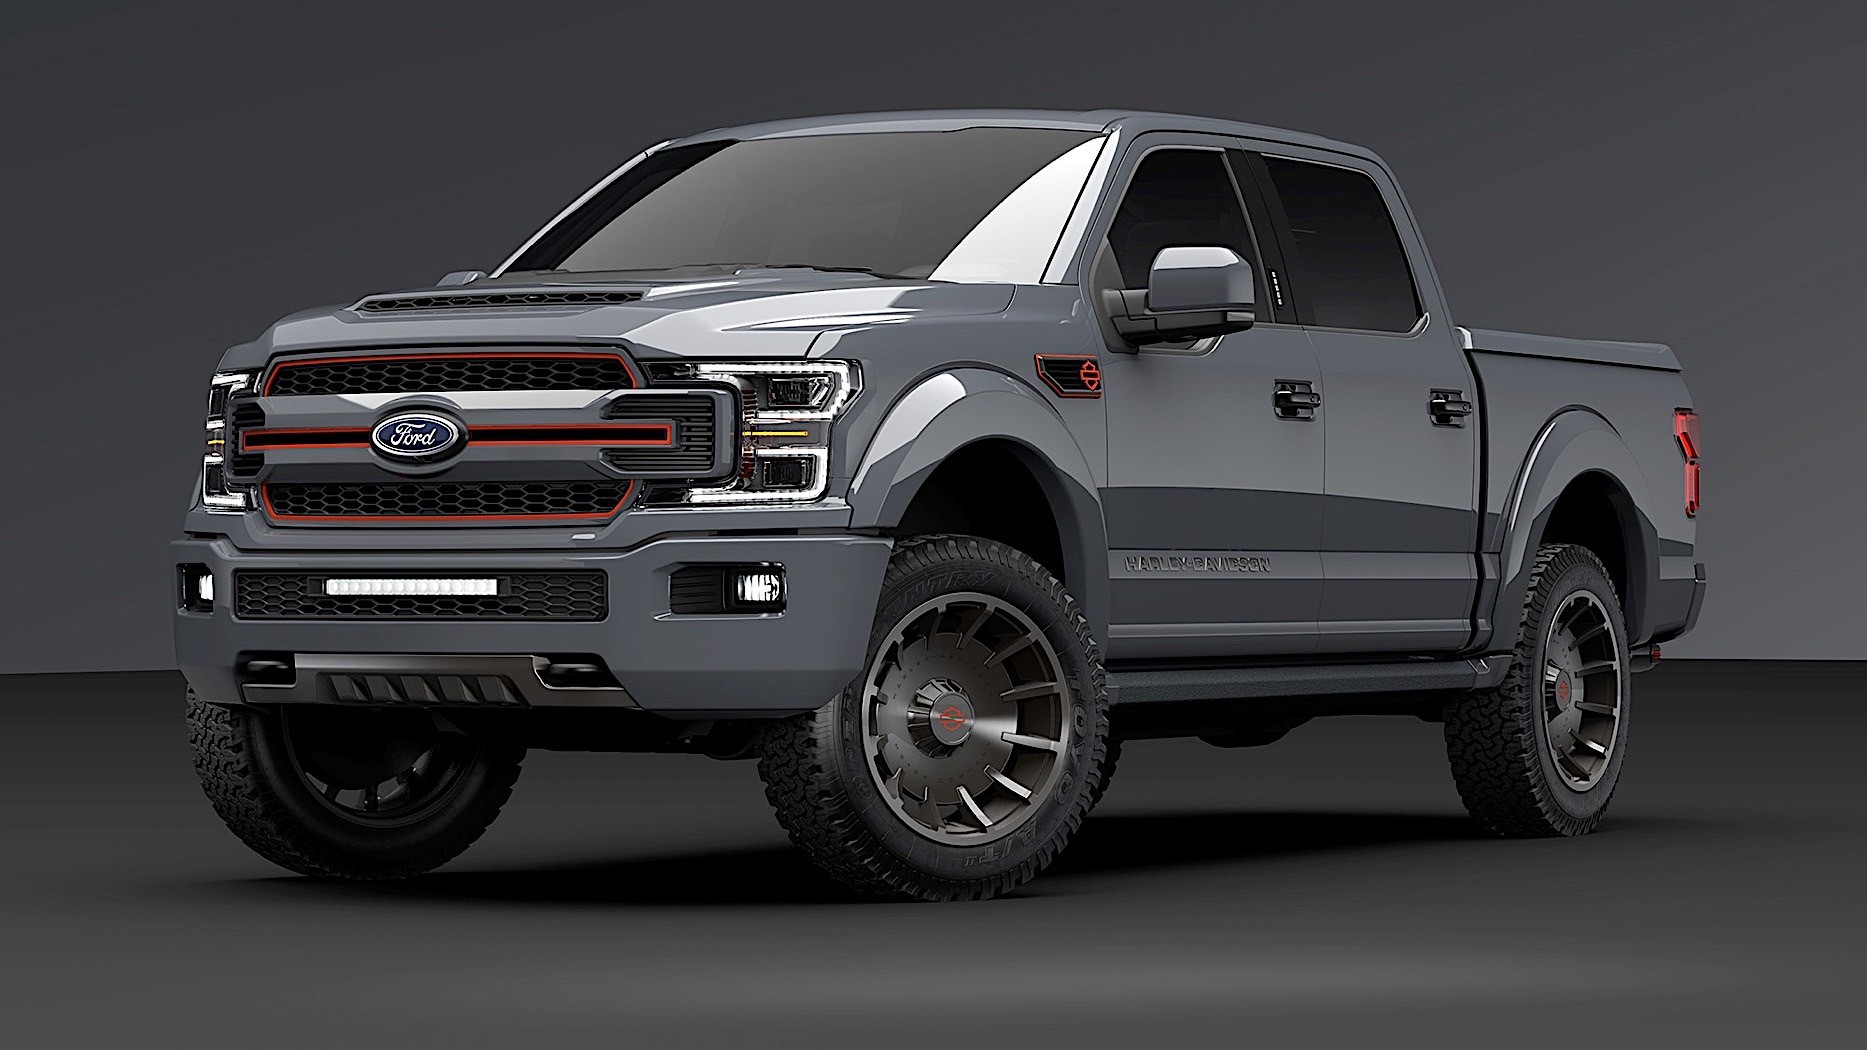 2019 Harley-Davidson Ford F-150 Pickup Truck Priced from $97,415